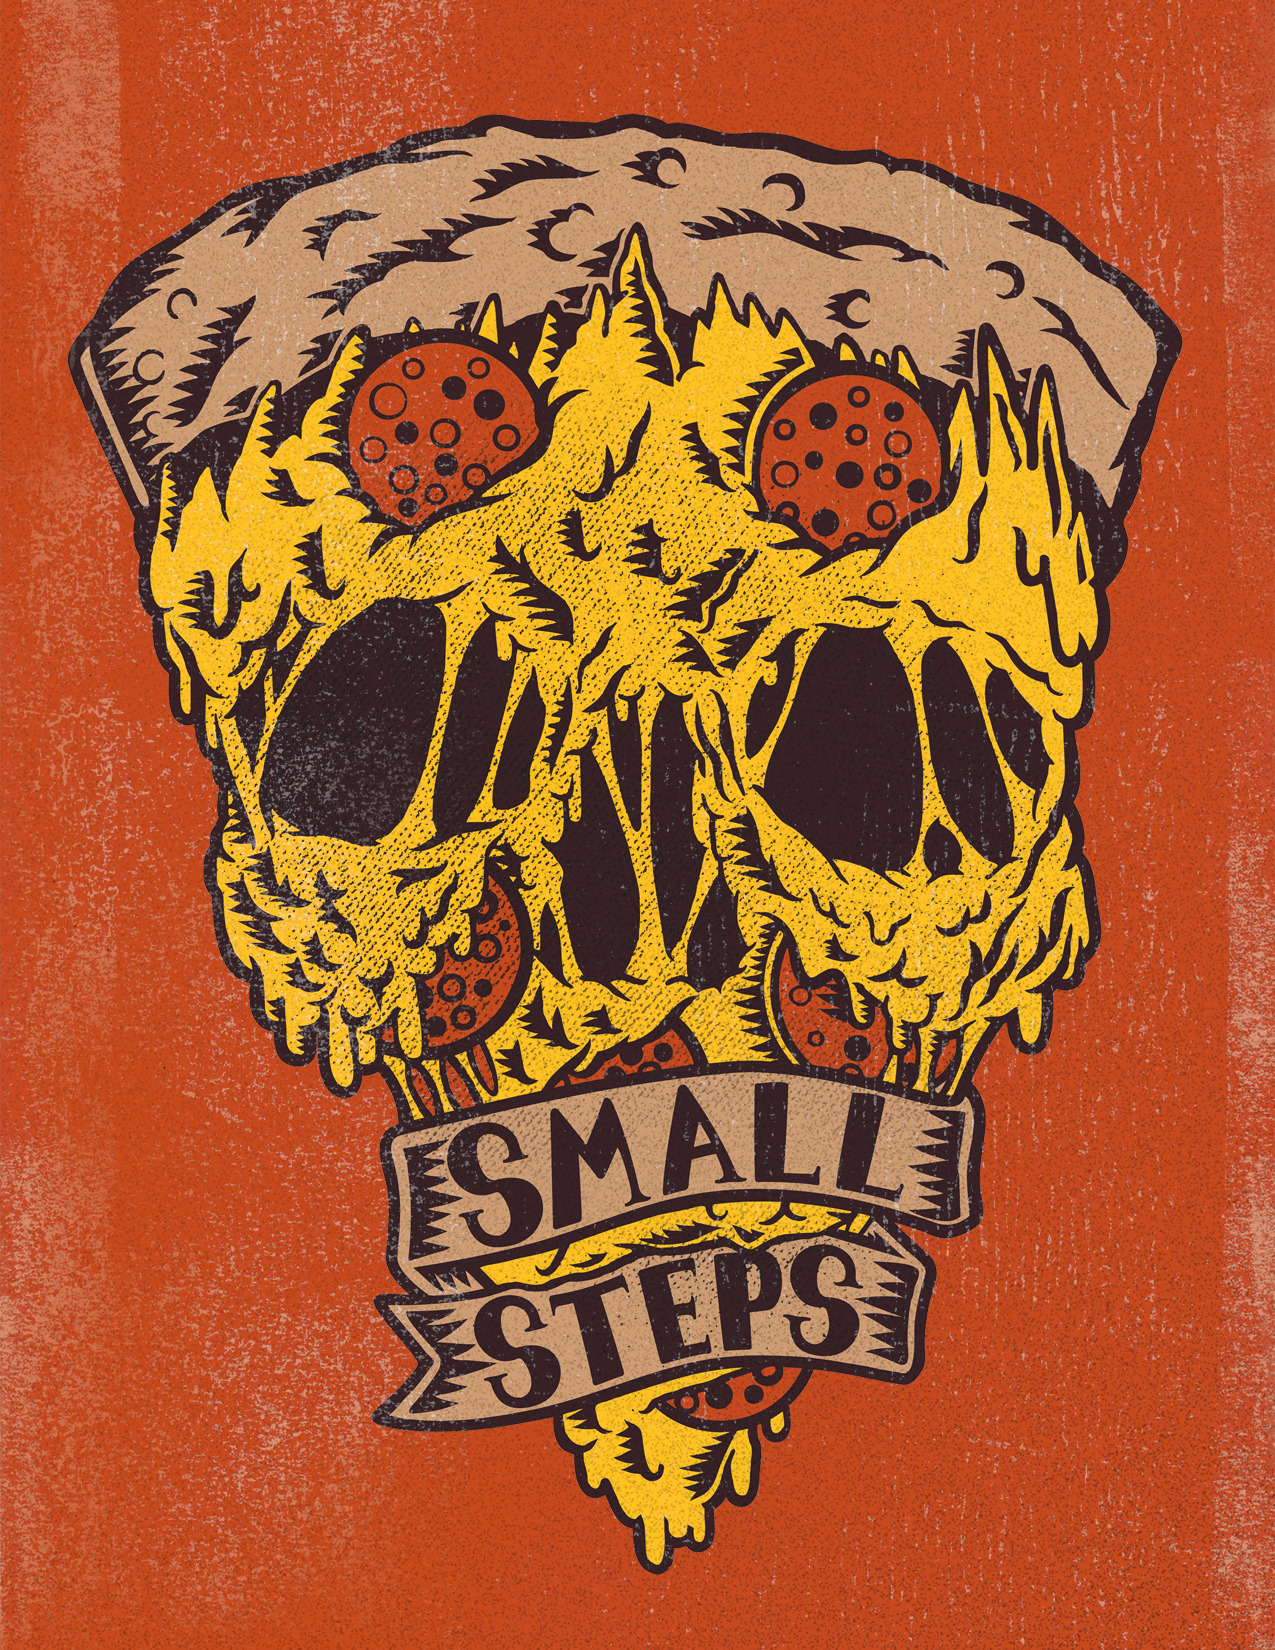 Behold, the Pizza Skull. This is an illustration for Athens, OH hardcore band, Small Steps. Stickers and patches are in the works. If you like what you see check out my blog: http://redntoothnclaw.tumblr.com/ Follow the band here: http://smallstepsband.tumblr.com/